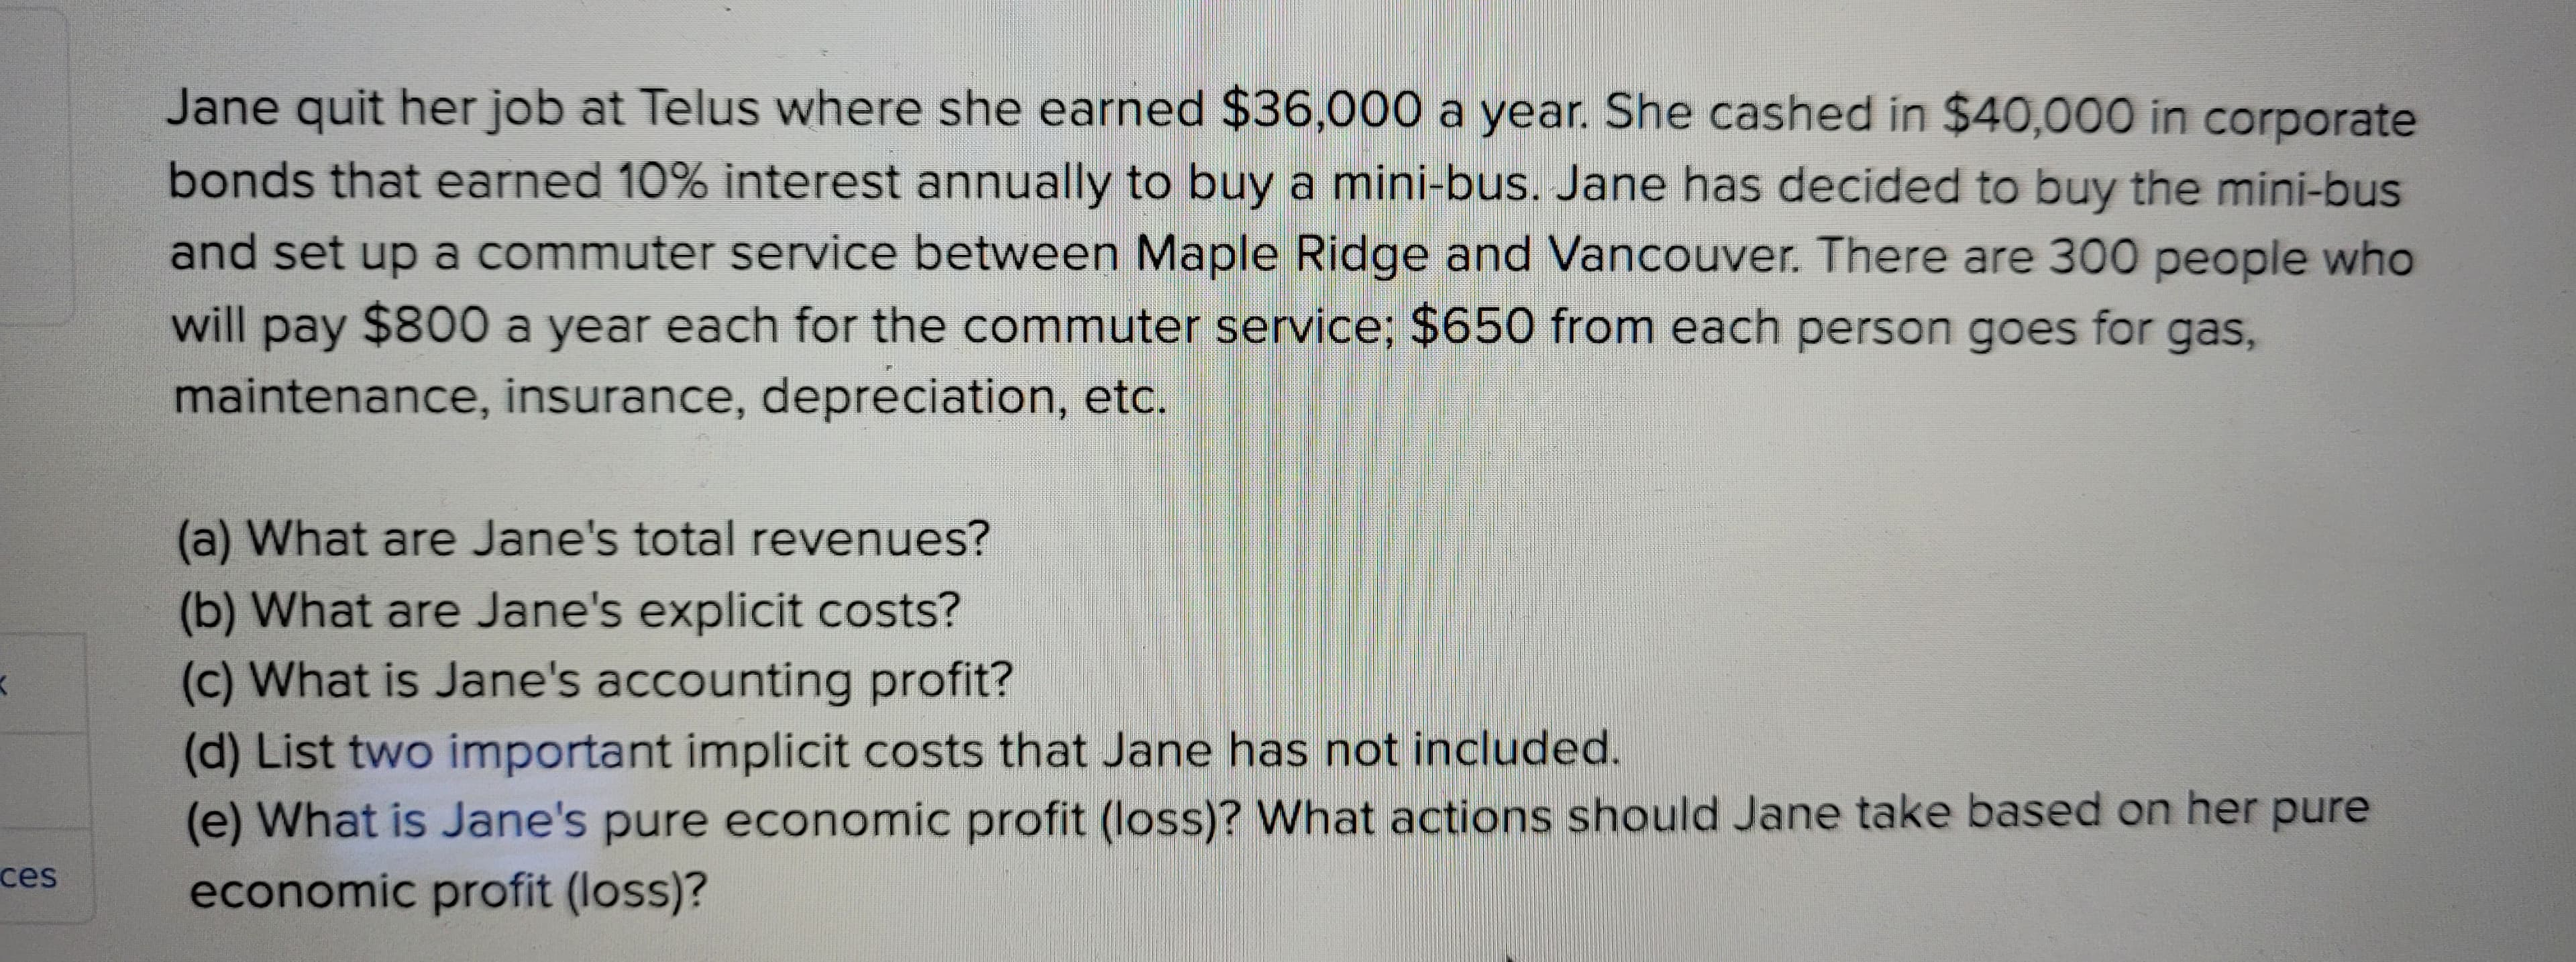 K
ces
Jane quit her job at Telus where she earned $36,000 a year. She cashed in $40,000 in corporate
bonds that earned 10% interest annually to buy a mini-bus. Jane has decided to buy the mini-bus
and set up a commuter service between Maple Ridge and Vancouver. There are 300 people who
will pay $800 a year each for the commuter service; $650 from each person goes for gas,
maintenance, insurance, depreciation, etc.
(a) What are Jane's total revenues?
(b) What are Jane's explicit costs?
(c) What is Jane's accounting profit?
(d) List two important implicit costs that Jane has not included.
(e) What is Jane's pure economic profit (loss)? What actions should Jane take based on her pure
economic profit (loss)?